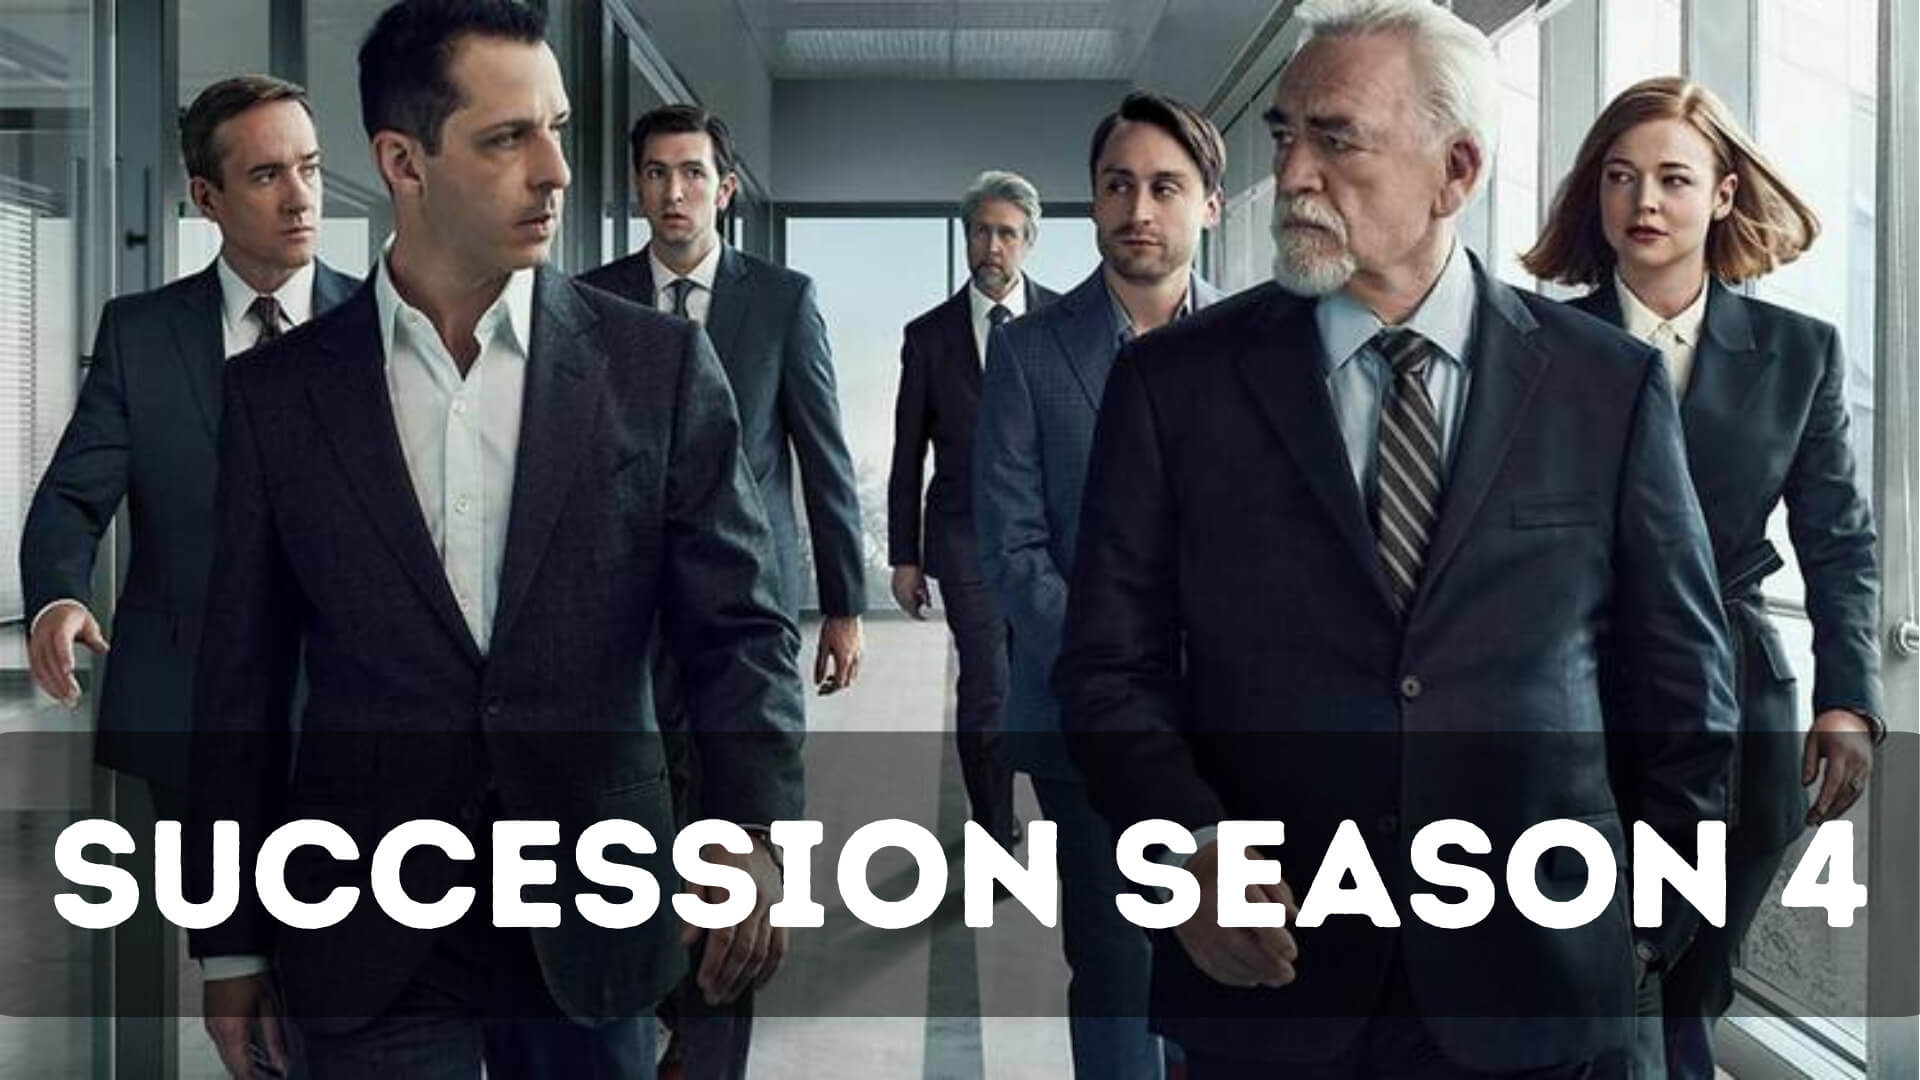 When Is Succession Season 4 Coming Out? (Release Date)